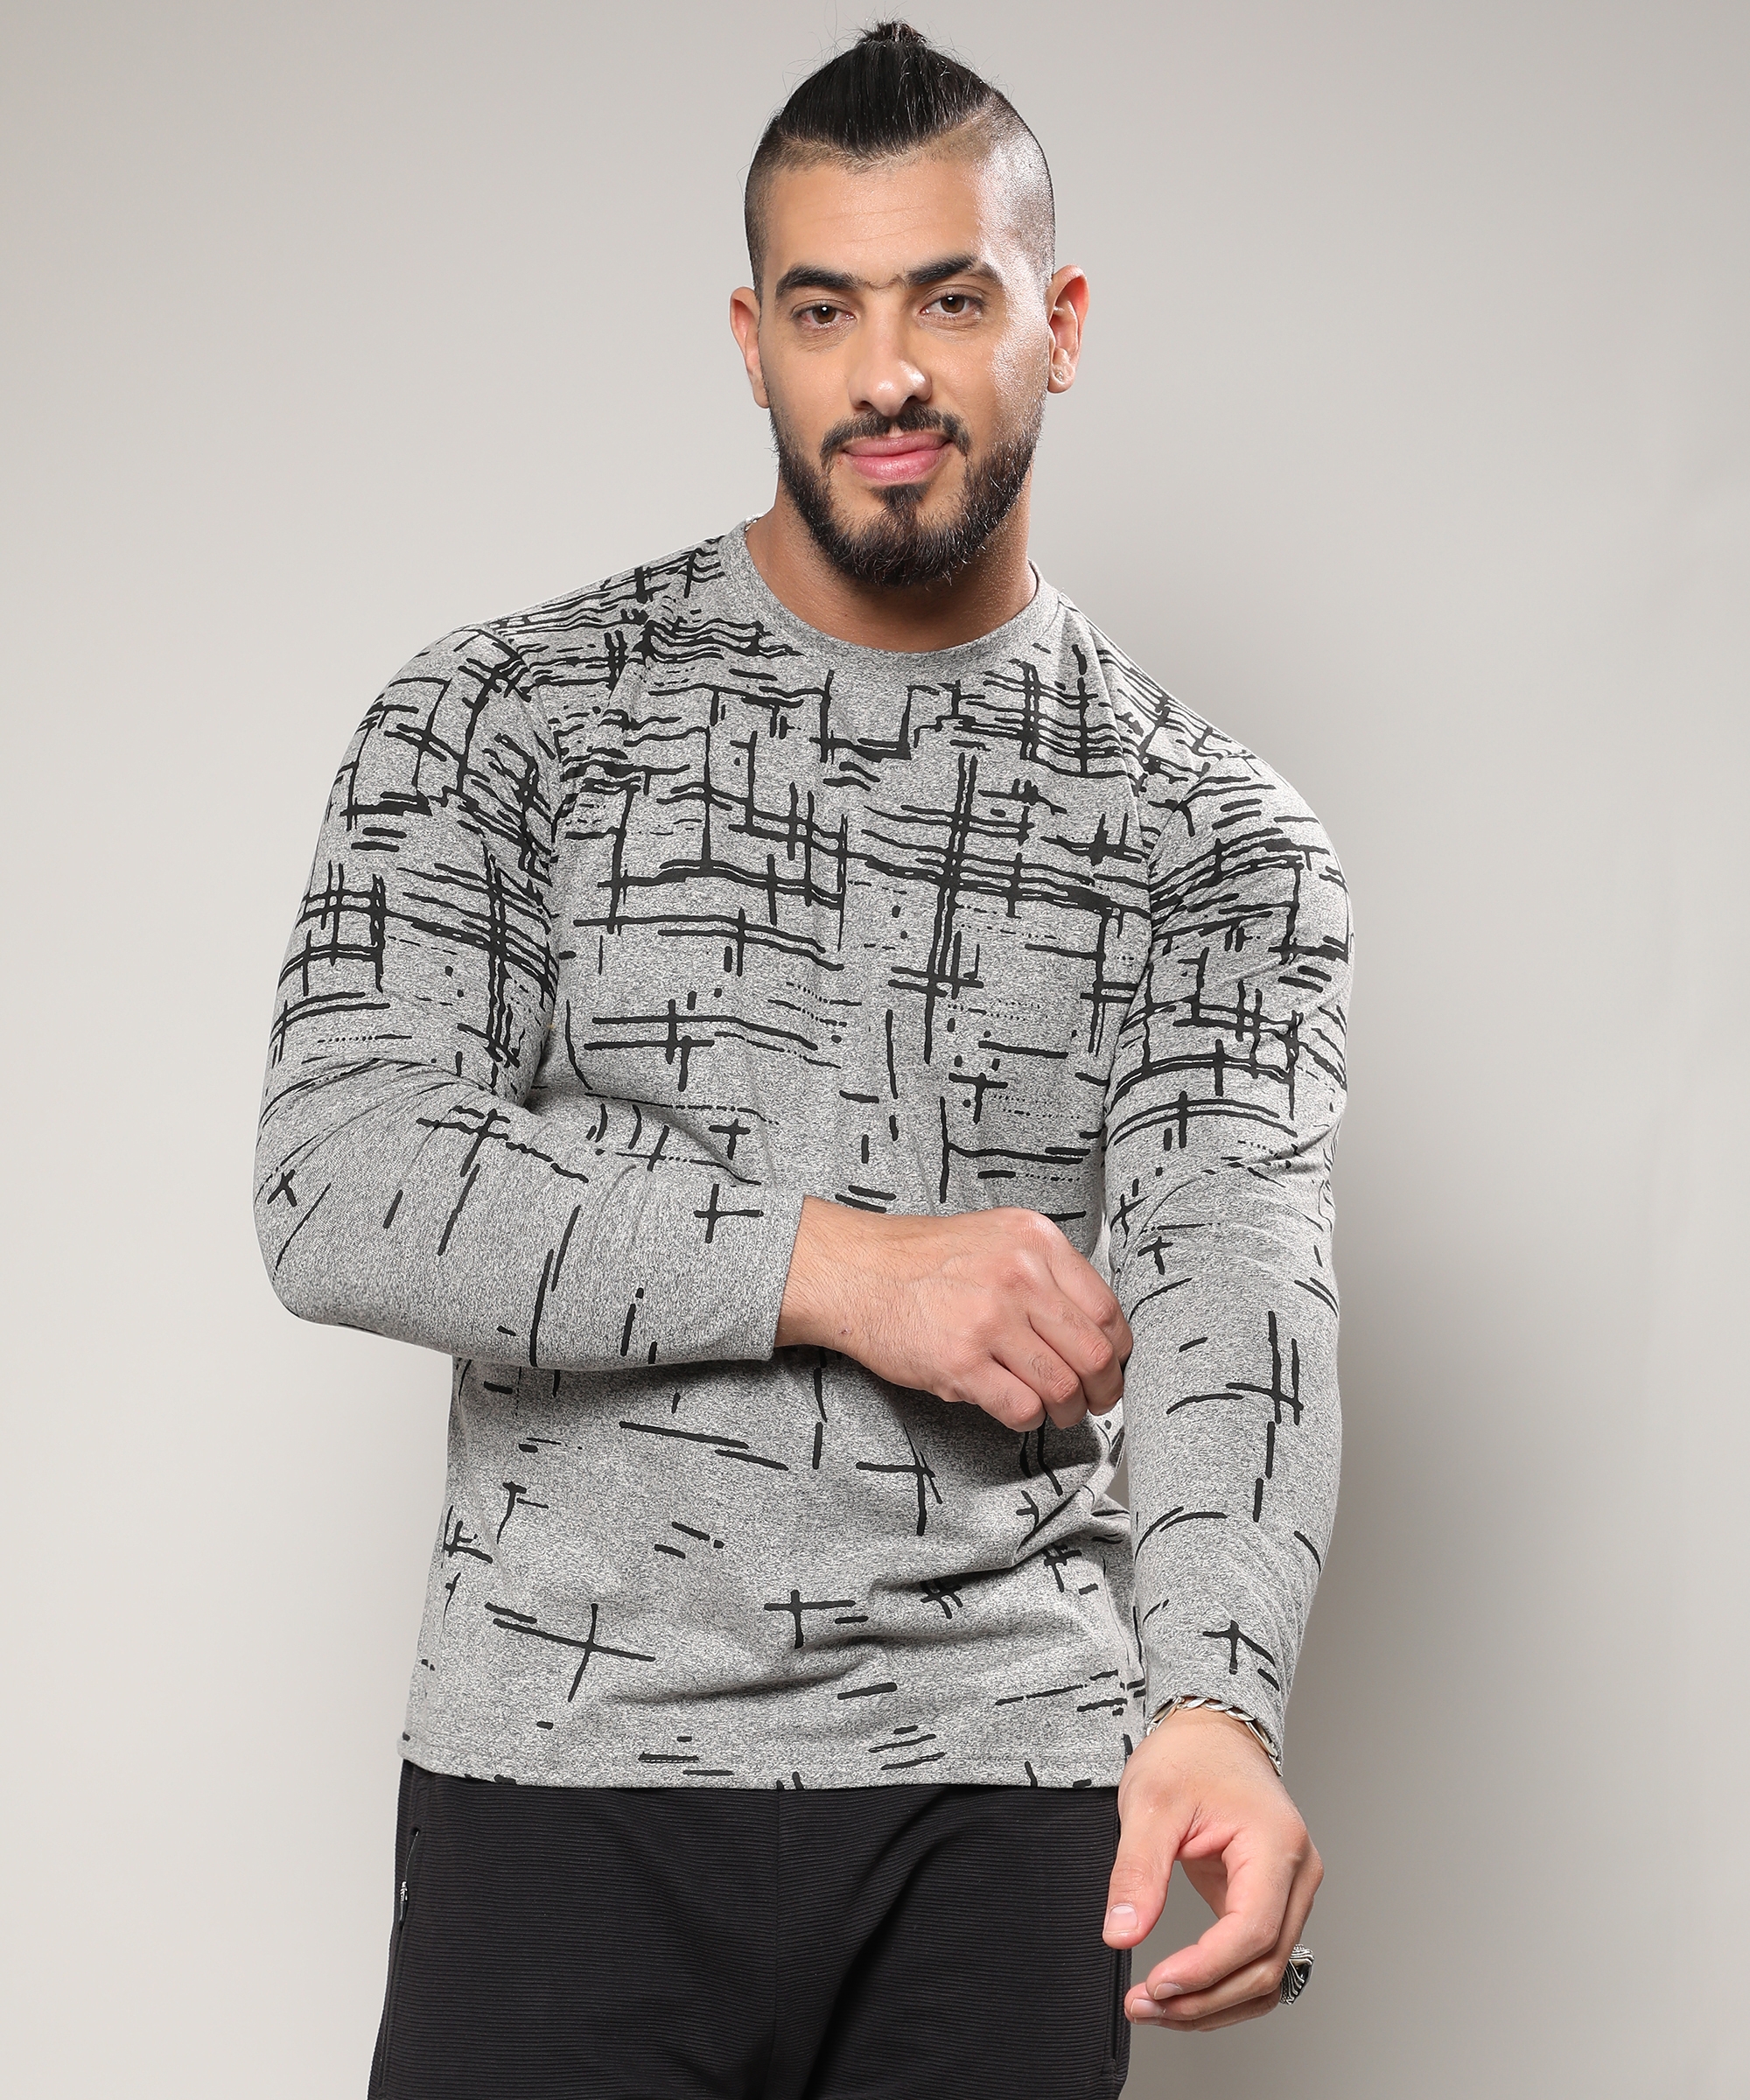 Instafab Plus | Men's Moon Grey Abstract Lined T-Shirt